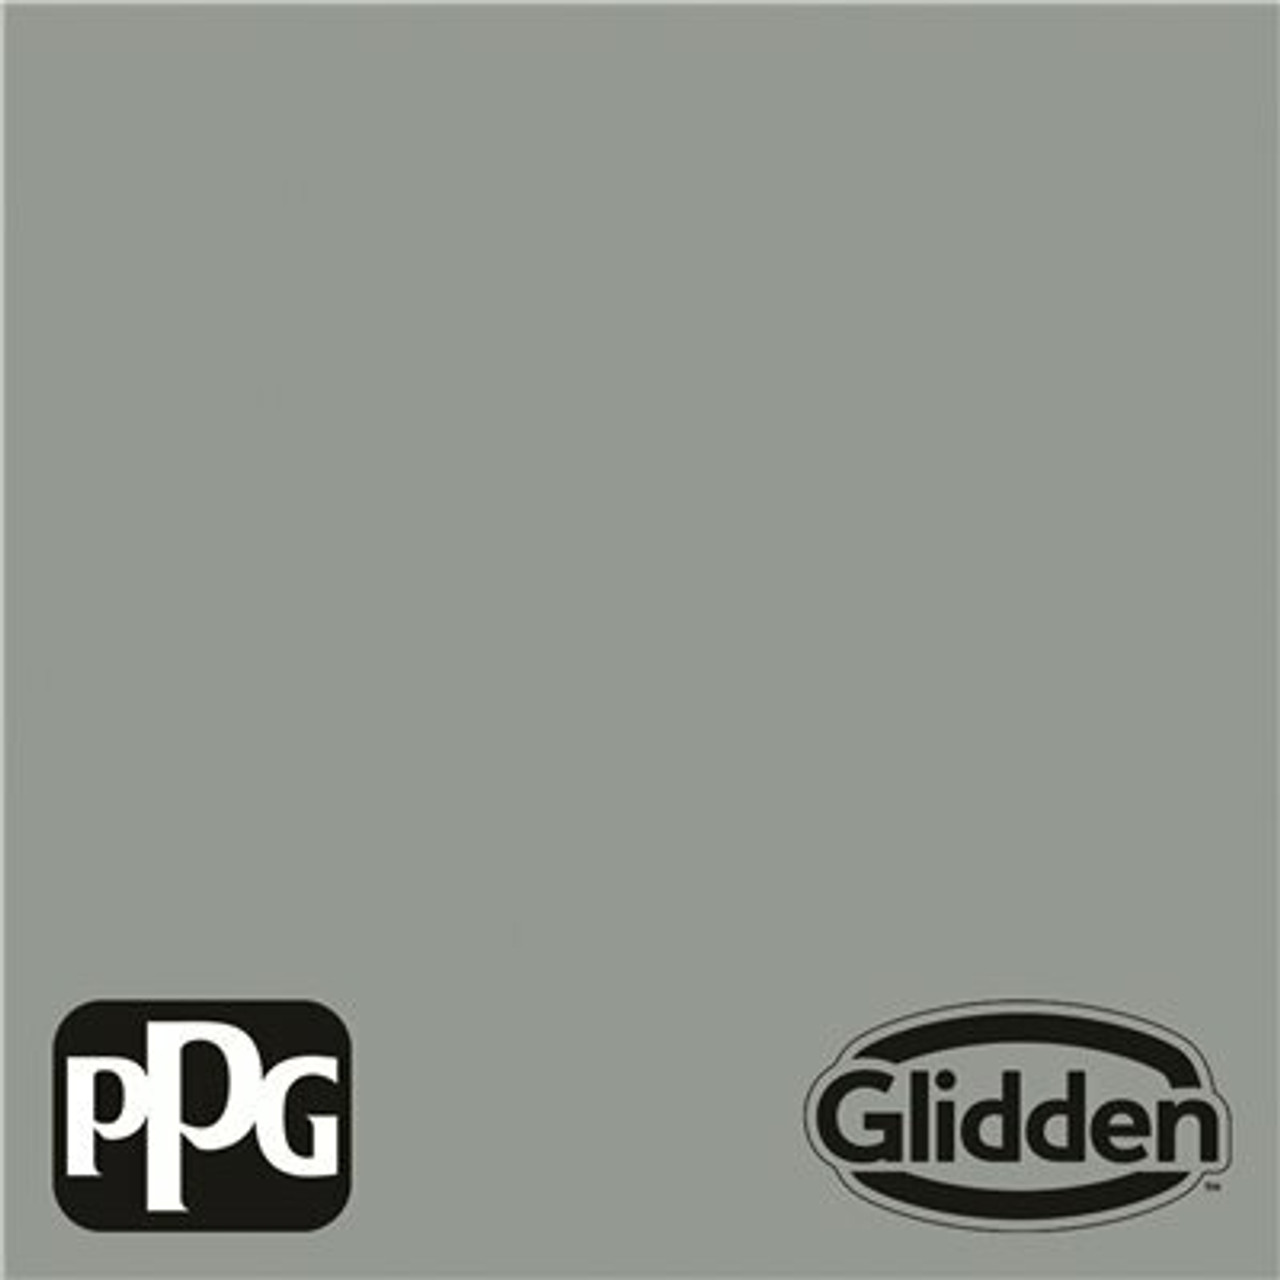 Glidden Premium 5 Gal. #Ppg1036-4 After The Storm Semi-Gloss Interior Latex Paint